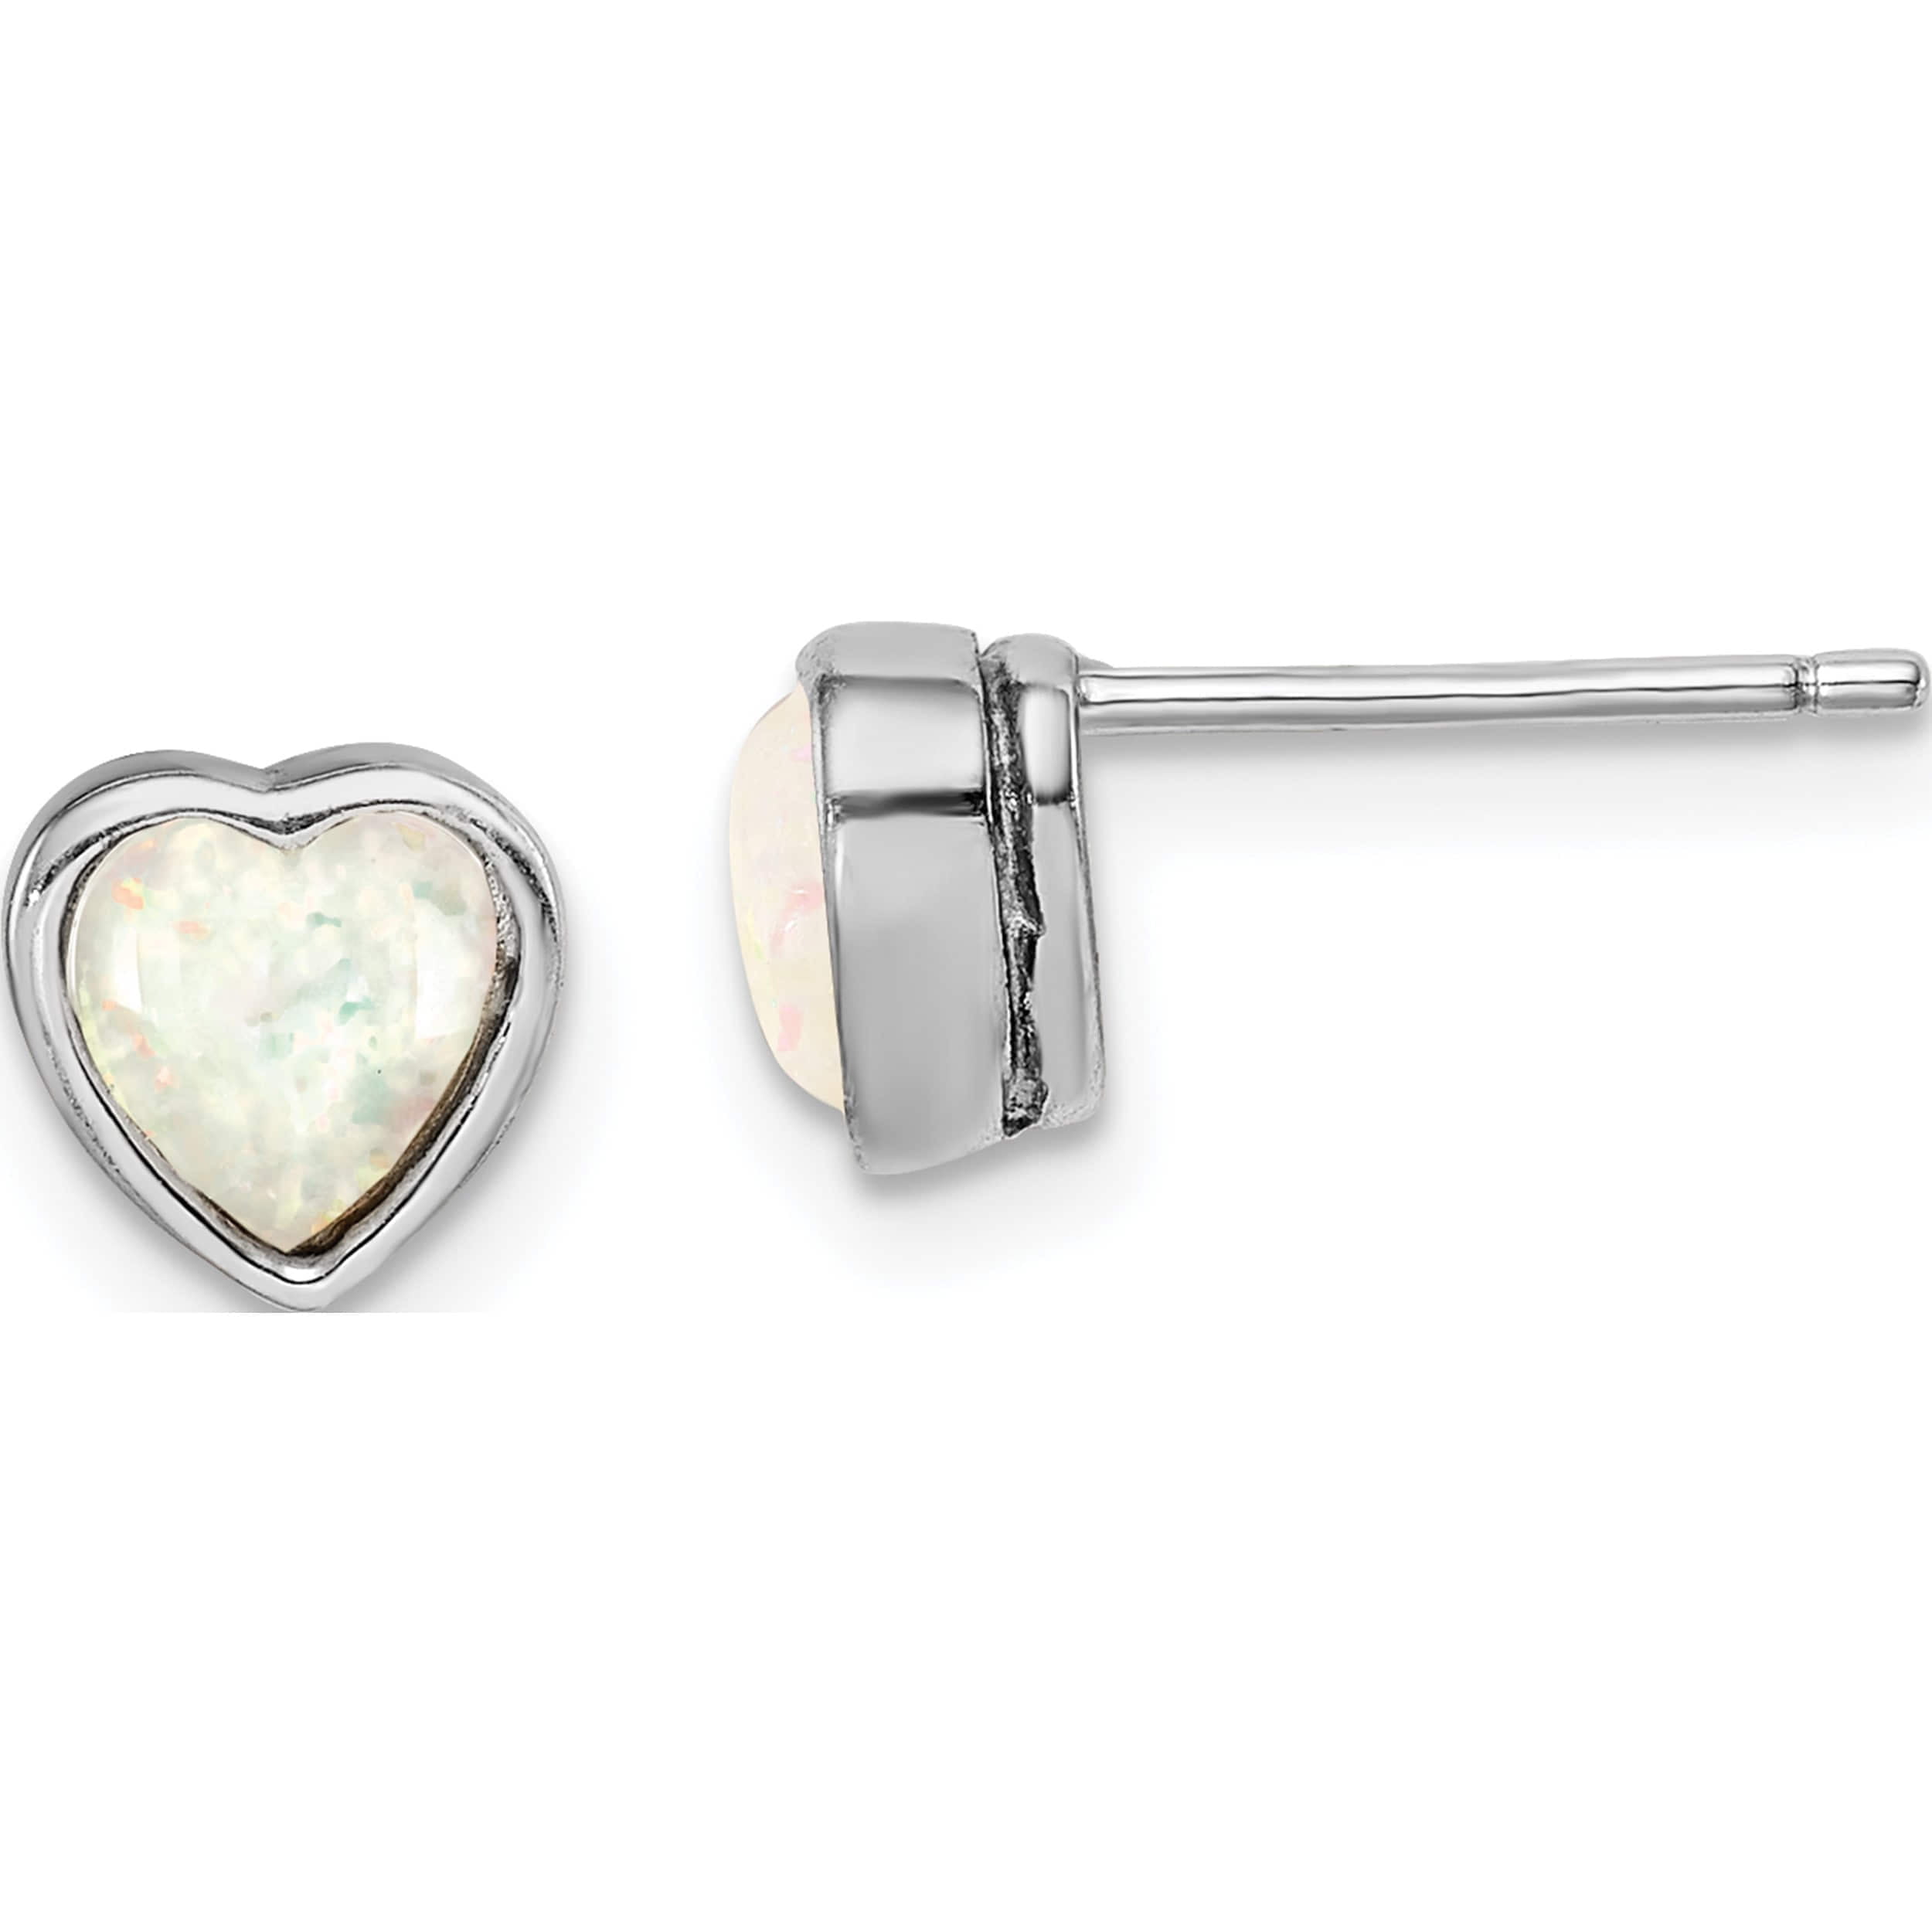 925 Sterling Silver Rhodium-plated Polished Simulated-Opal Heart Stud Post Earrings